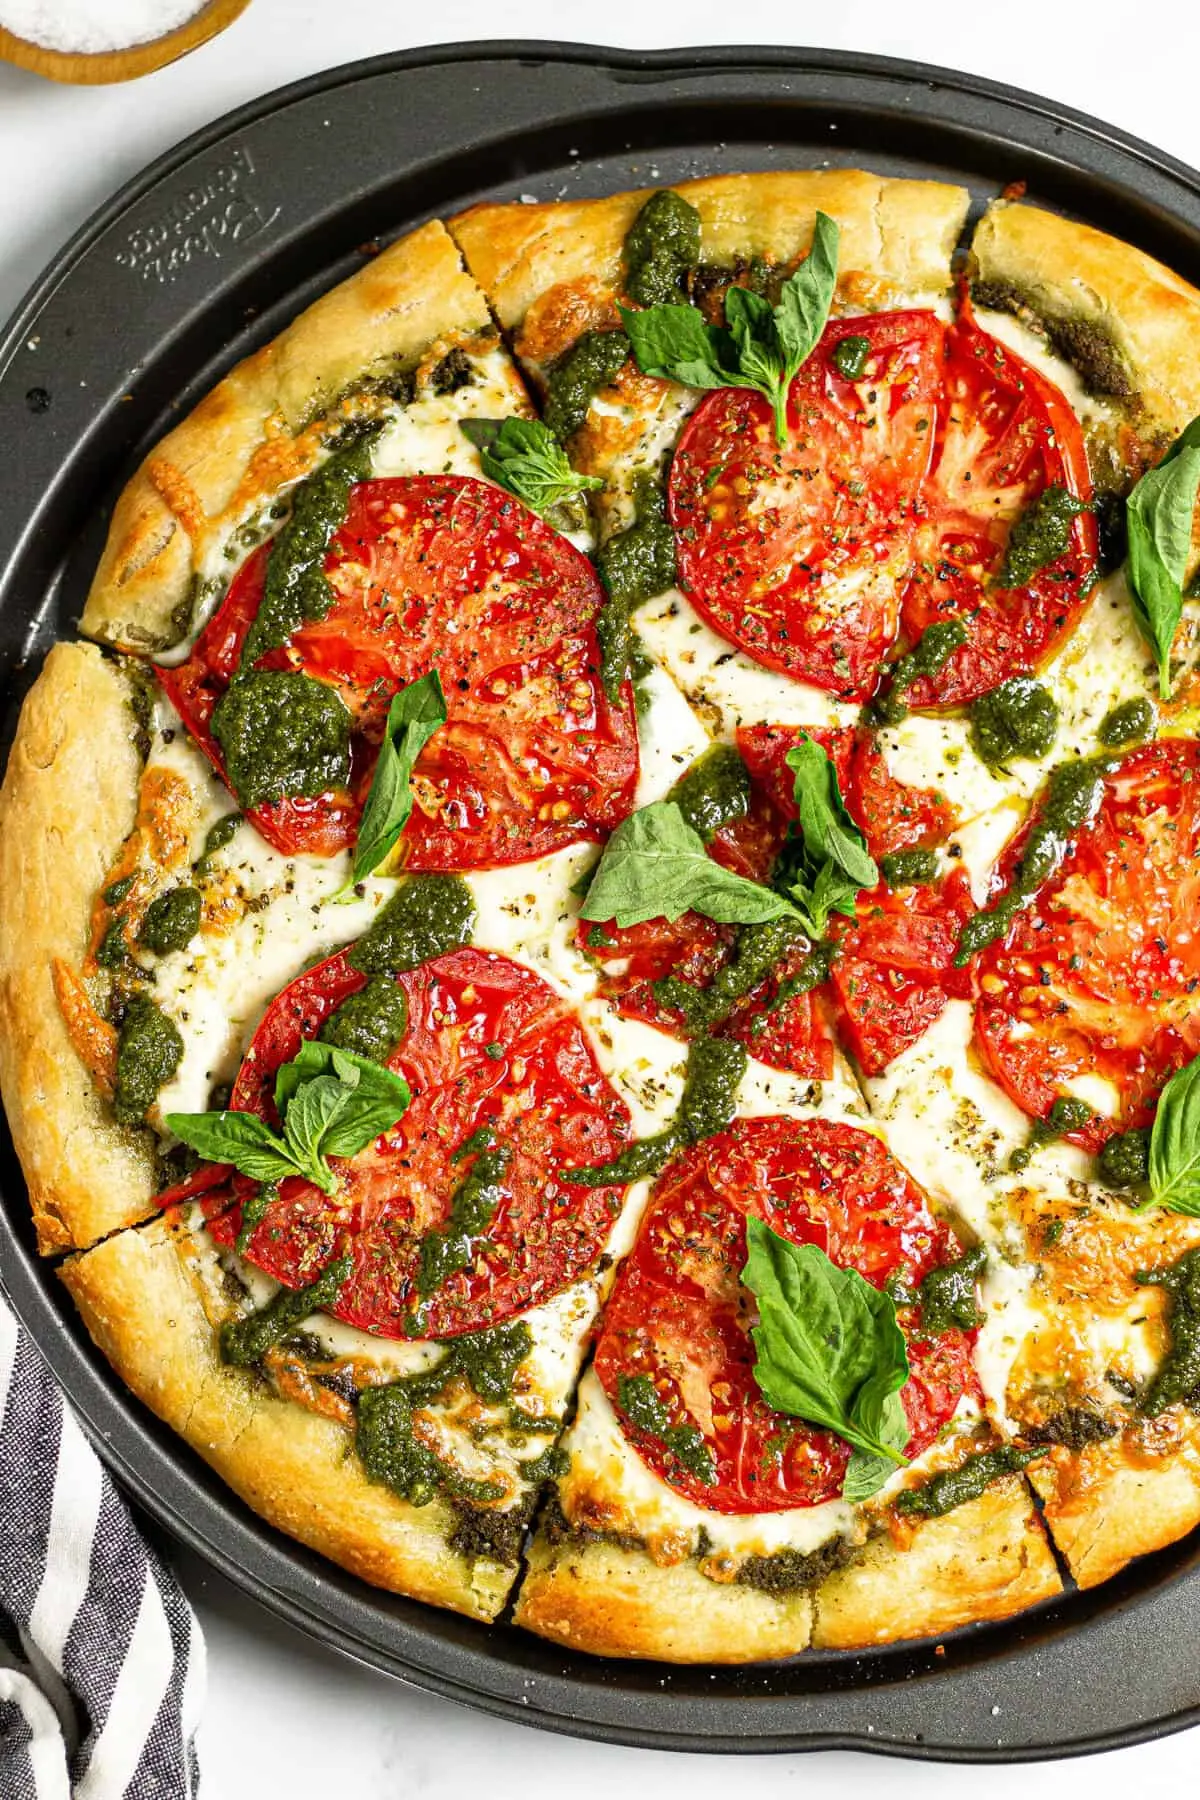 pizza with pesto sauce - What is pesto pizza sauce made of